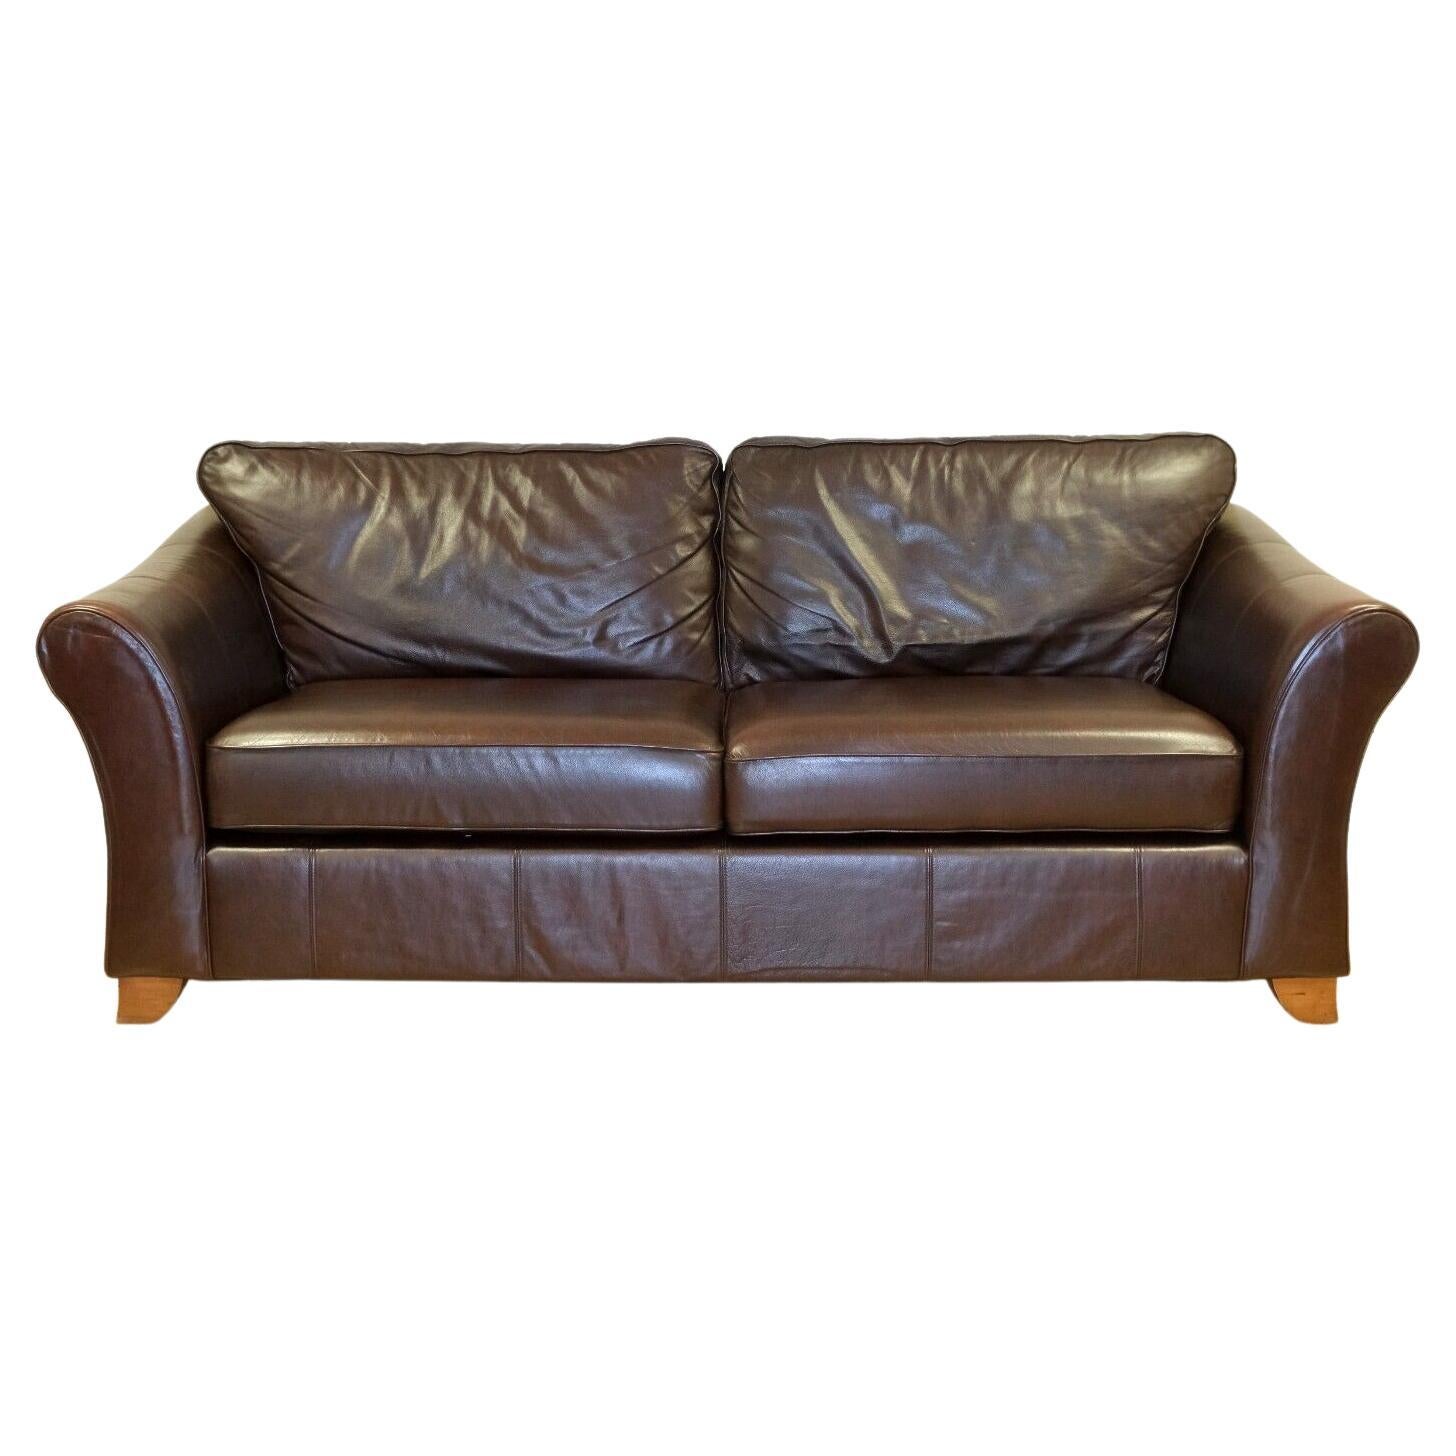 LOVELY MARKS & SPENCER ABBEY BRoWN LEATHER TWO SEATER SOFA ON WOODEN FEETs im Angebot